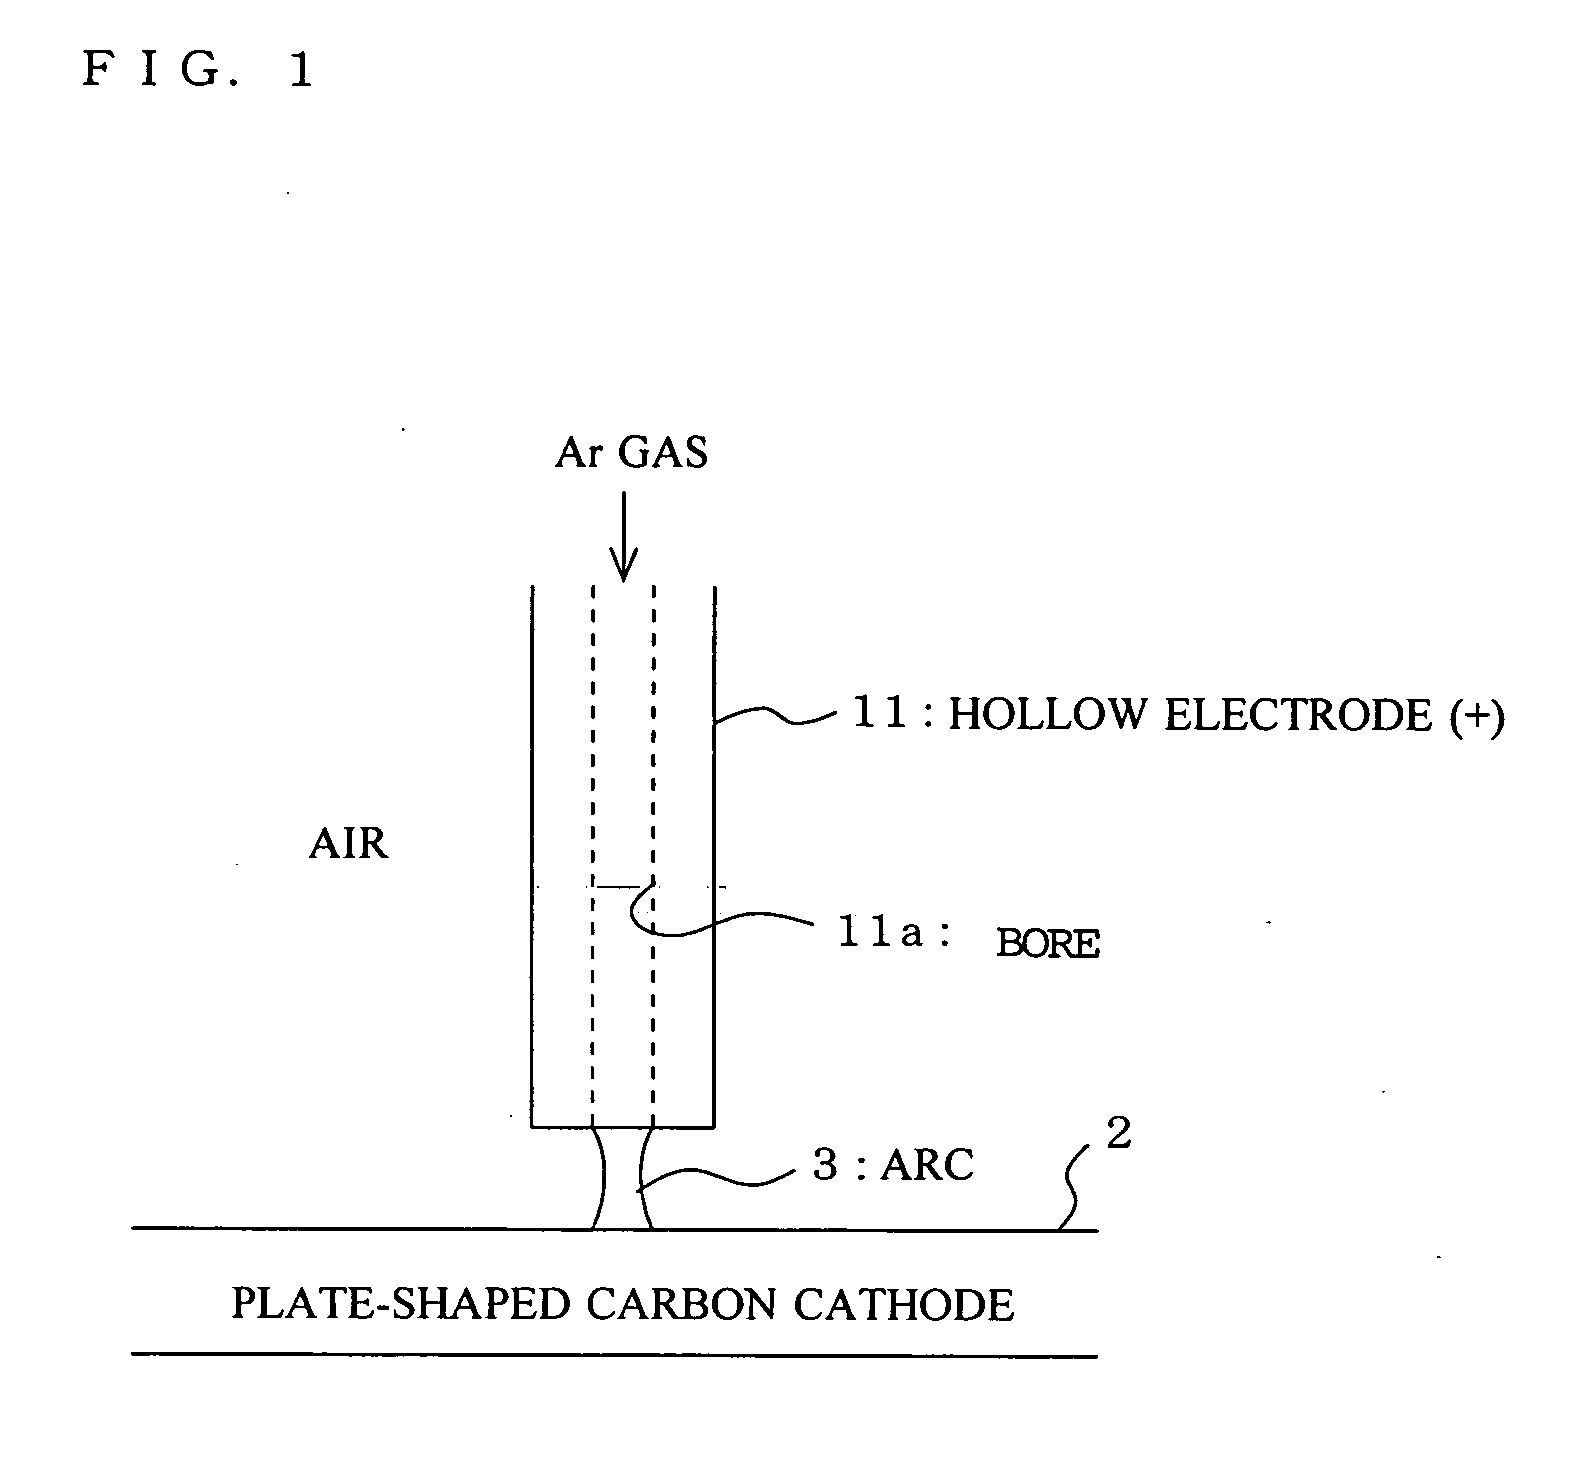 Tapelike material containing carbon nanotube and production method for cabon nanotube and electric field emission type electrode containing the tapelike material and production method therefor